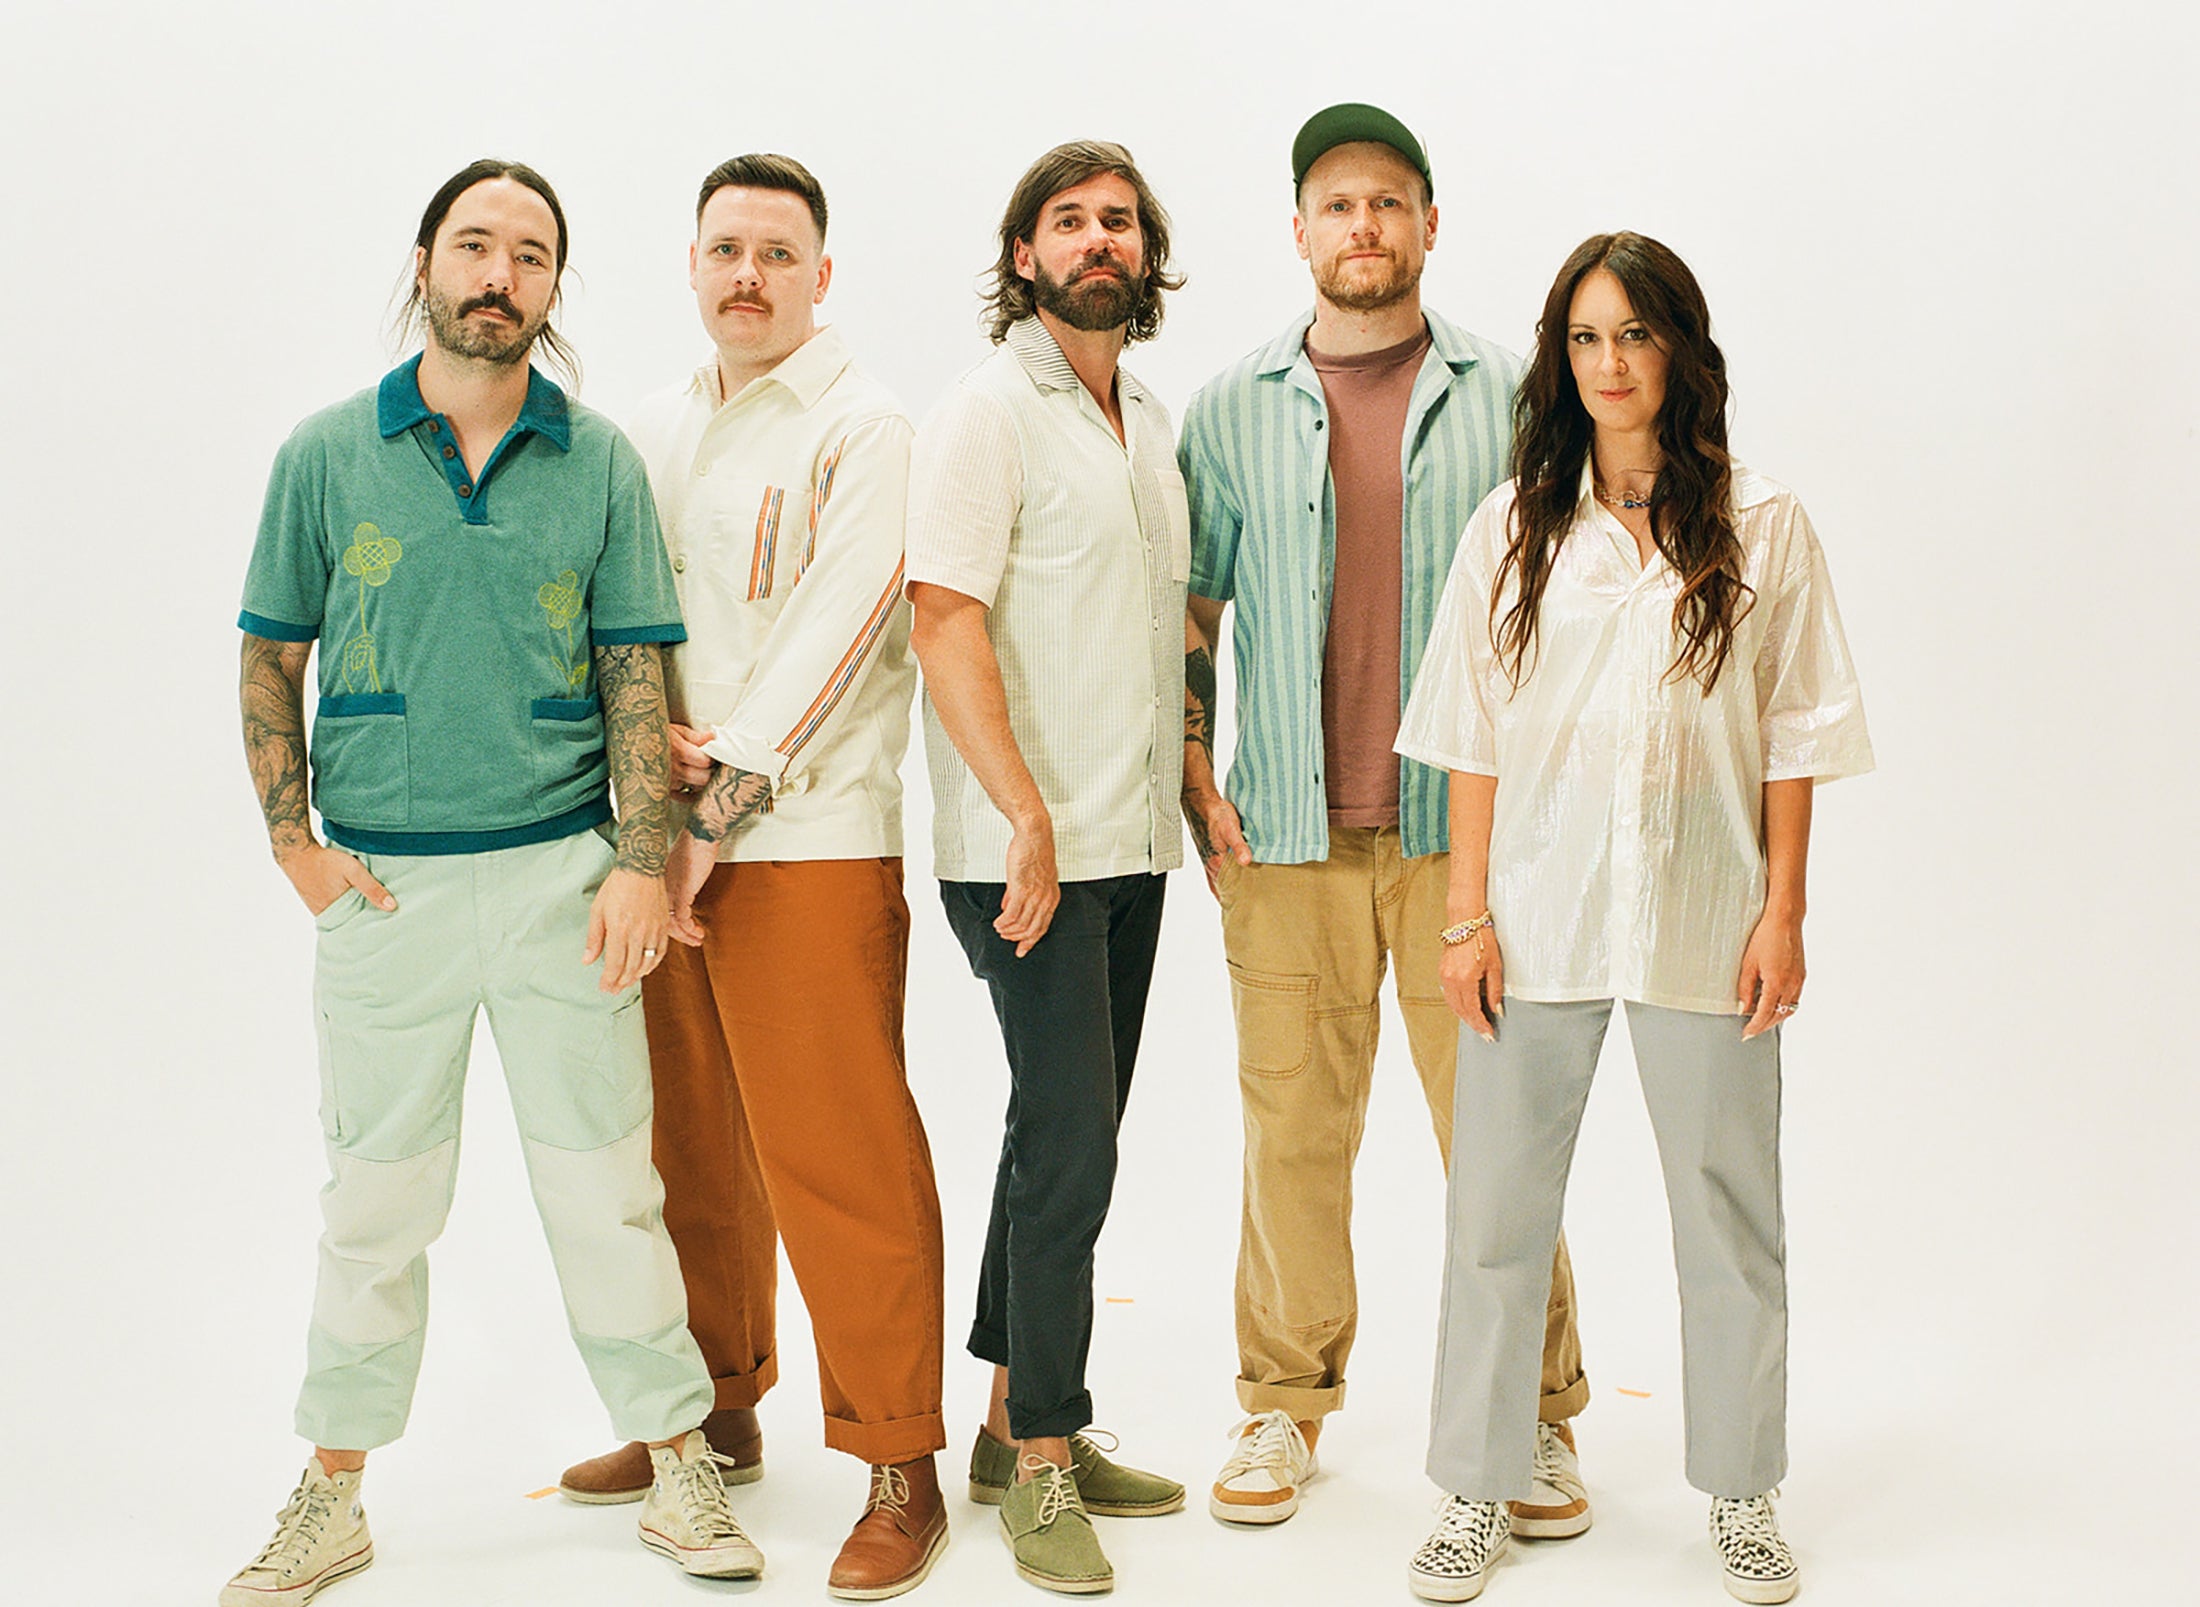 20 Front Street Presents: Rend Collective